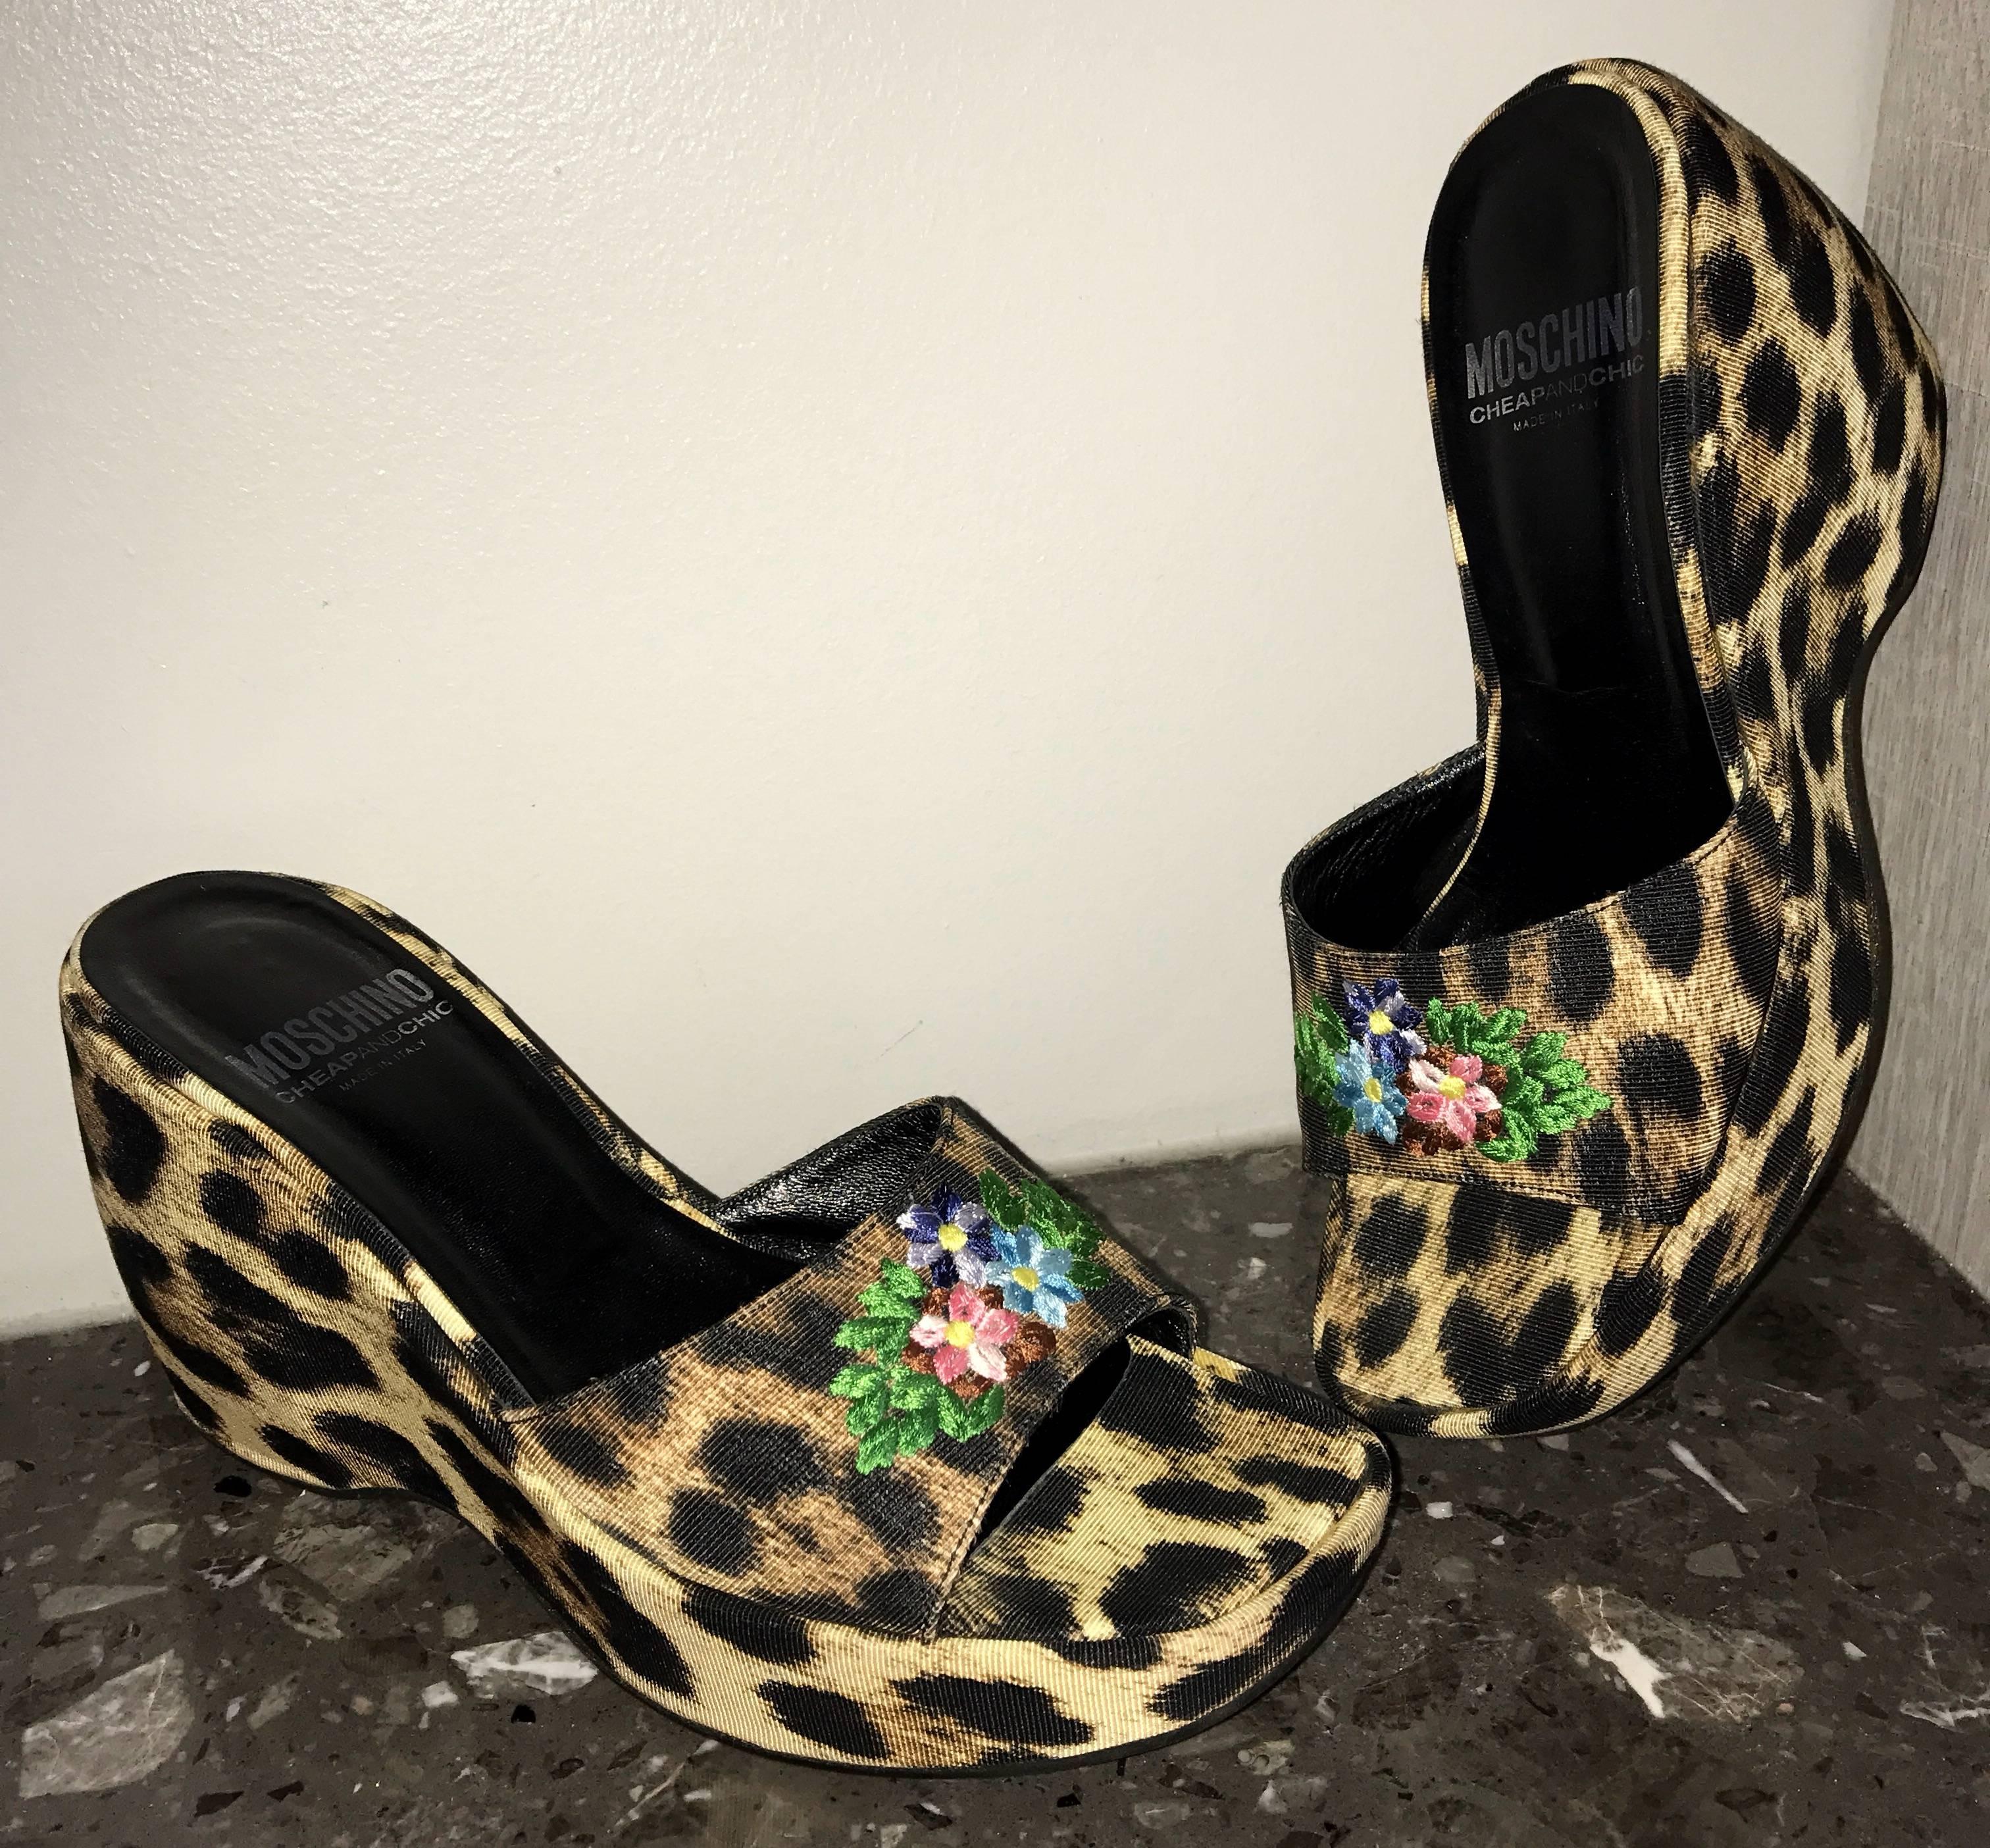 New Vintage Moschino Cheap & Chic 1990s Leopard + Flower Embroidered Wedges 36 6 For Sale 3